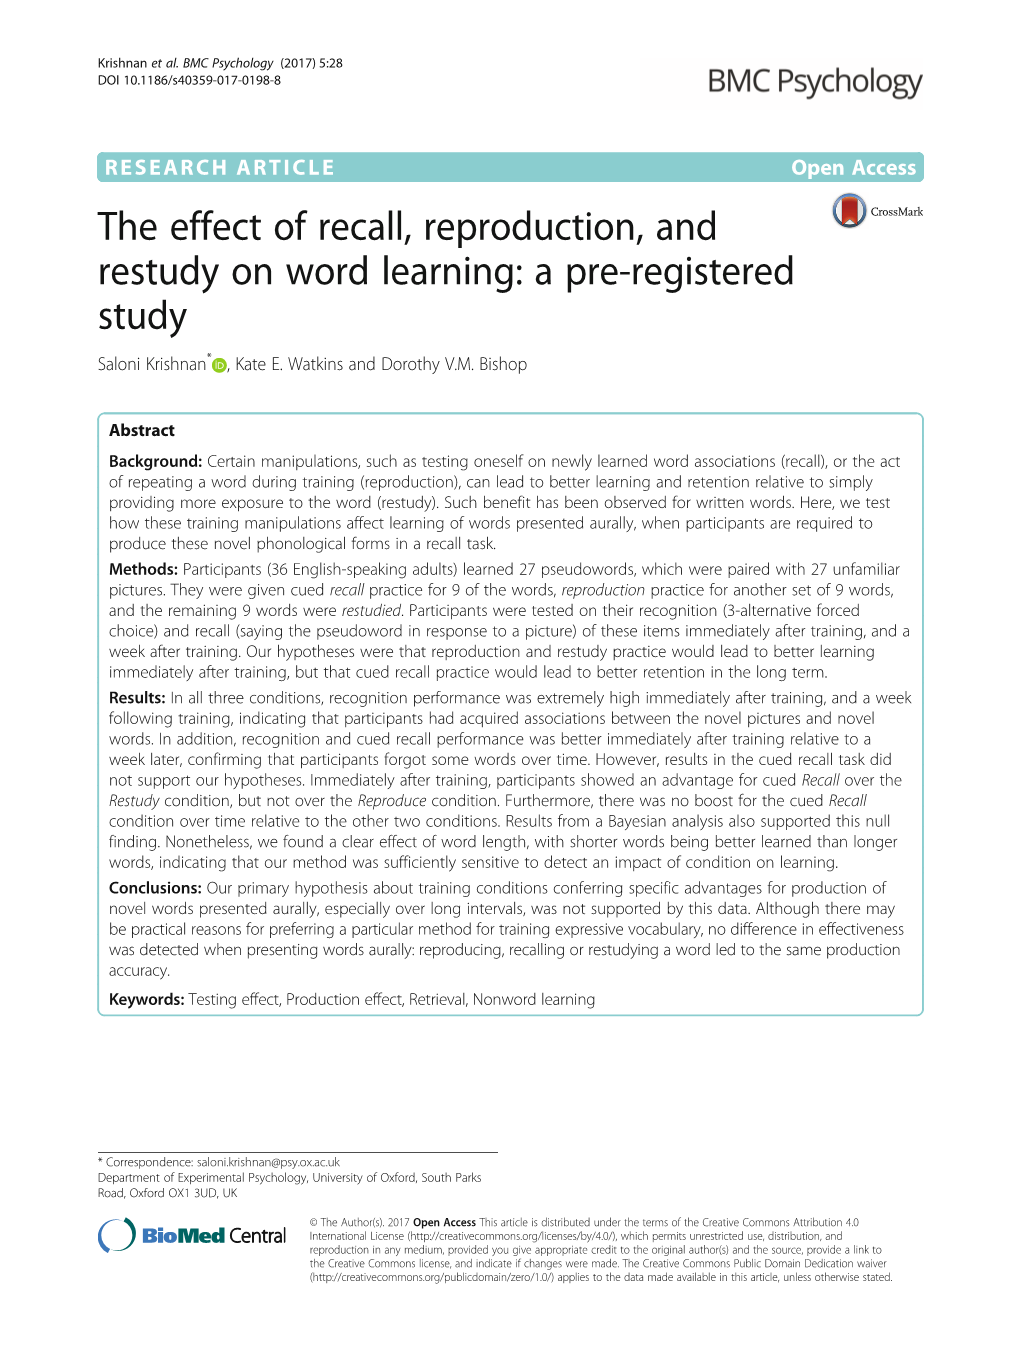 The Effect of Recall, Reproduction, and Restudy on Word Learning: a Pre-Registered Study Saloni Krishnan* , Kate E